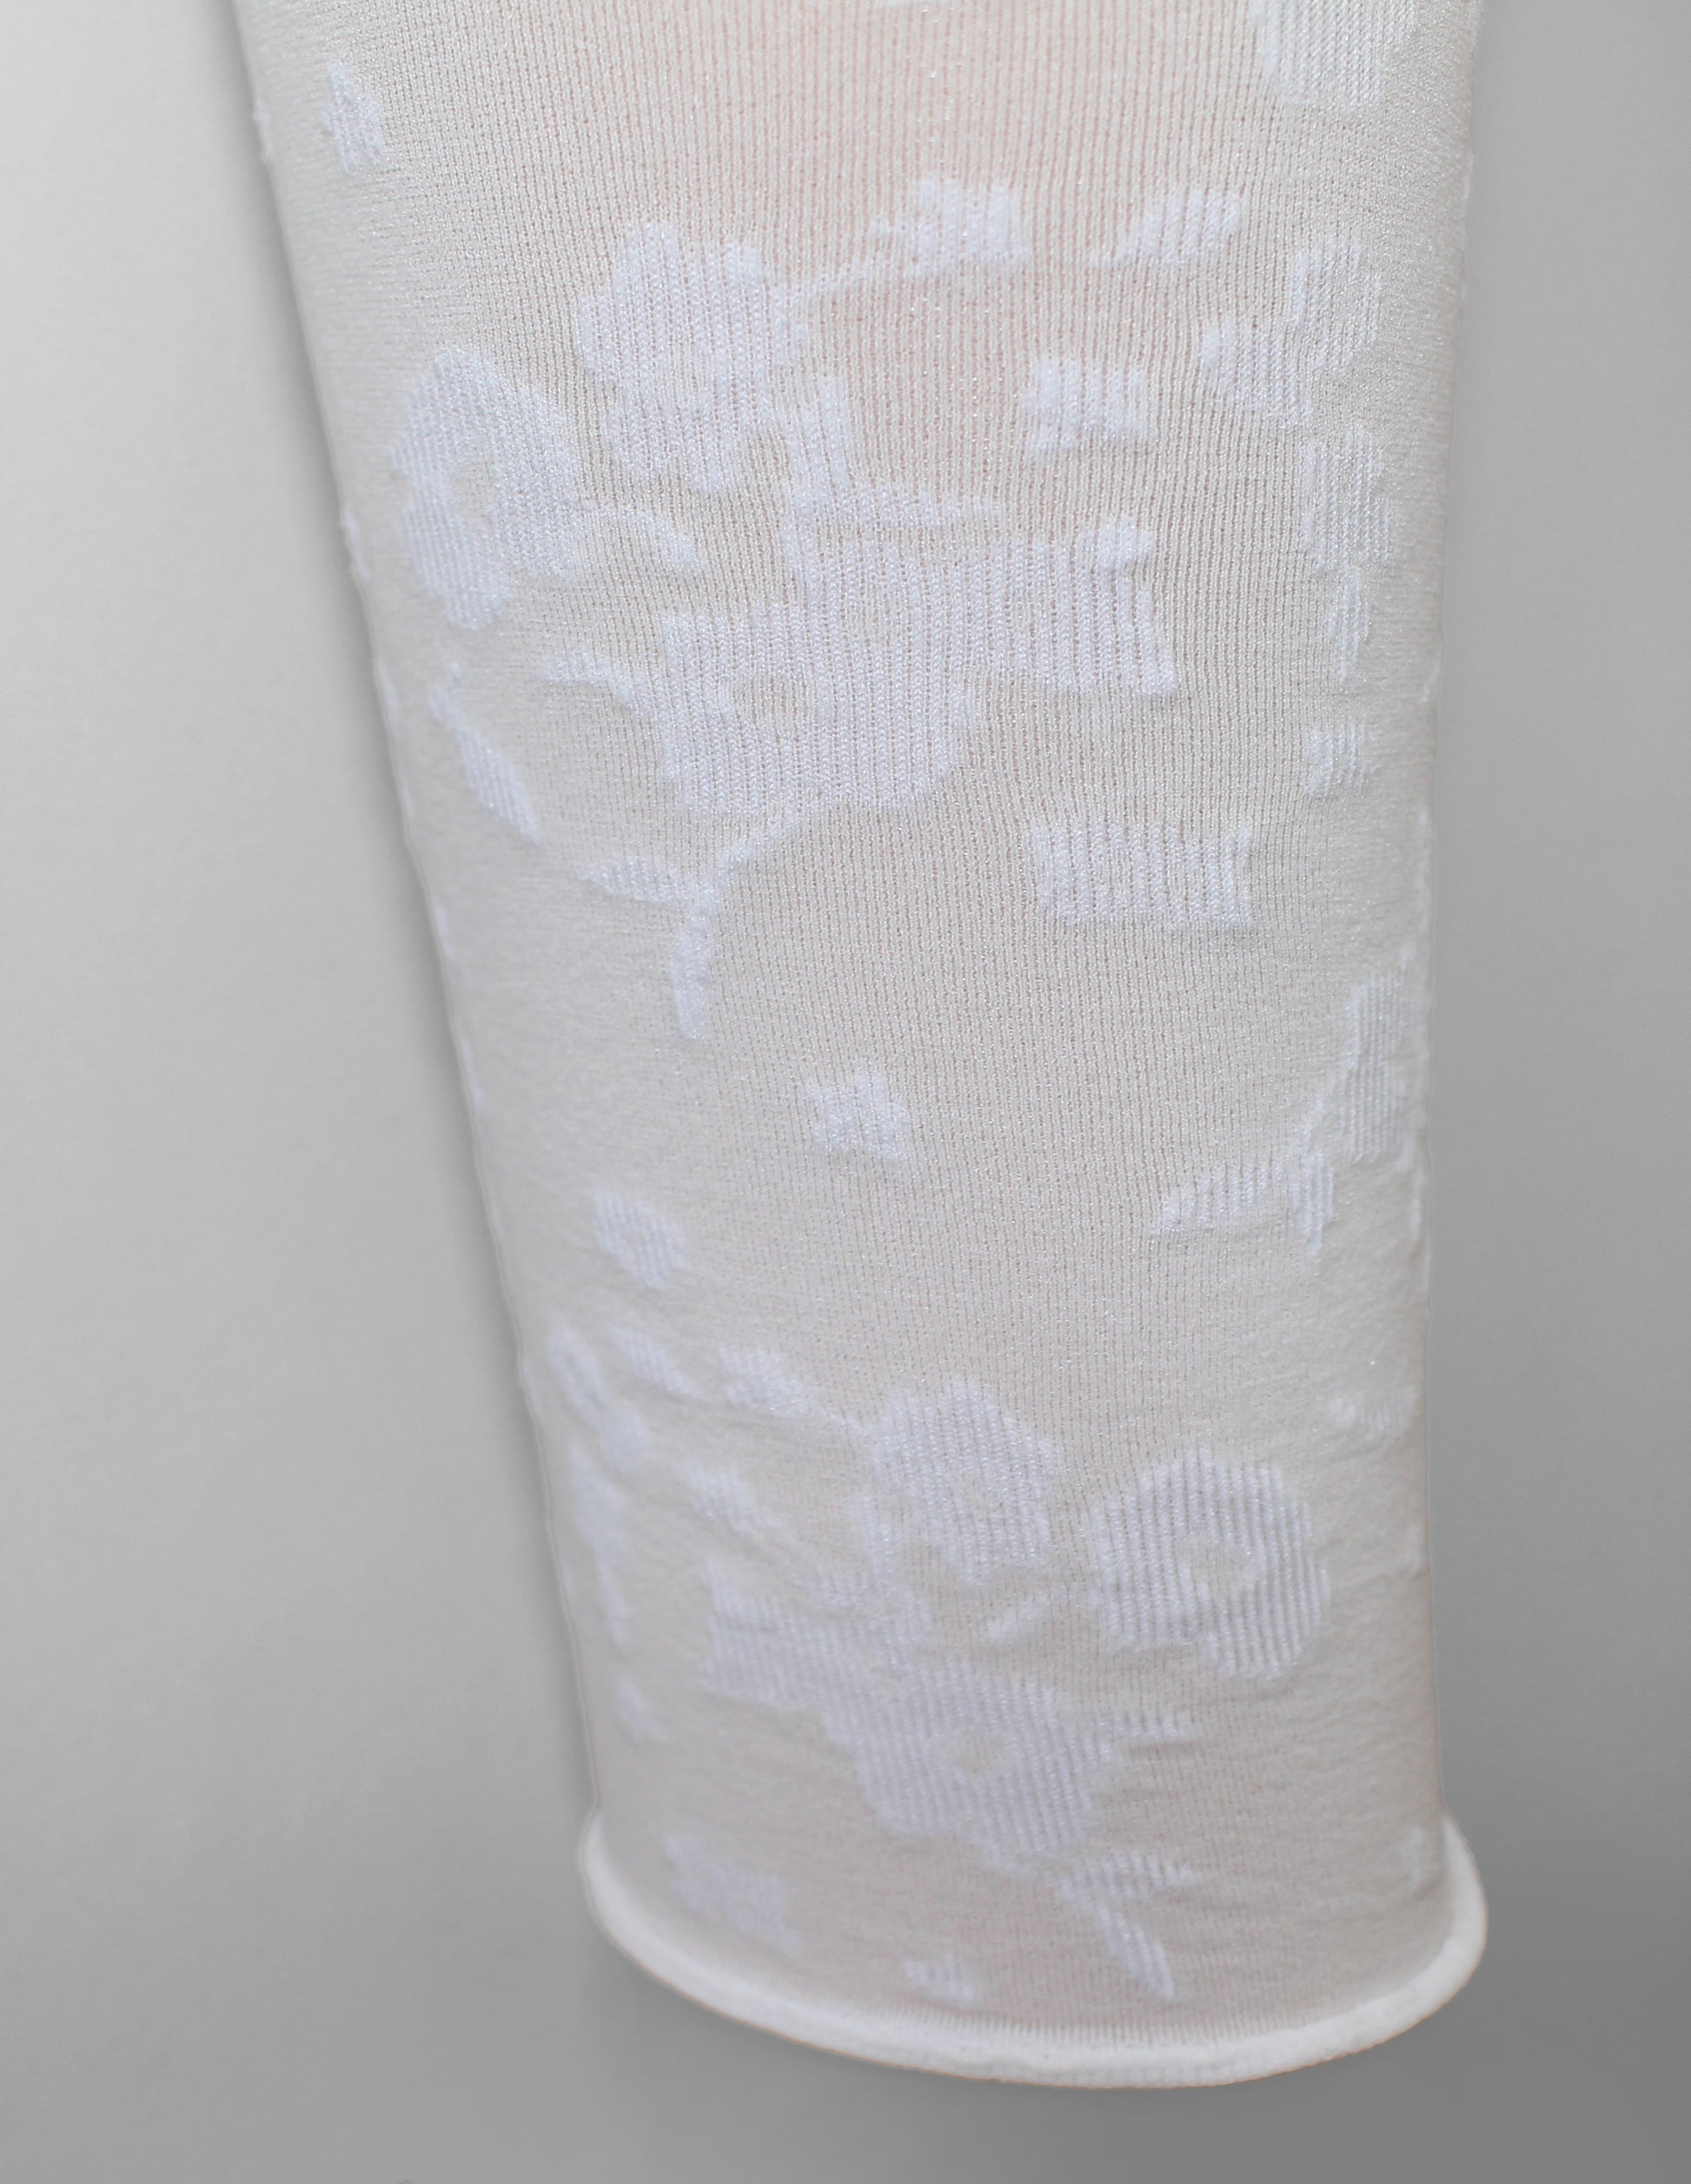 Omsa Lavanda Pantacollant - Soft white semi opaque kid's footless tights with a woven floral pattern and soft roll cuff edge.